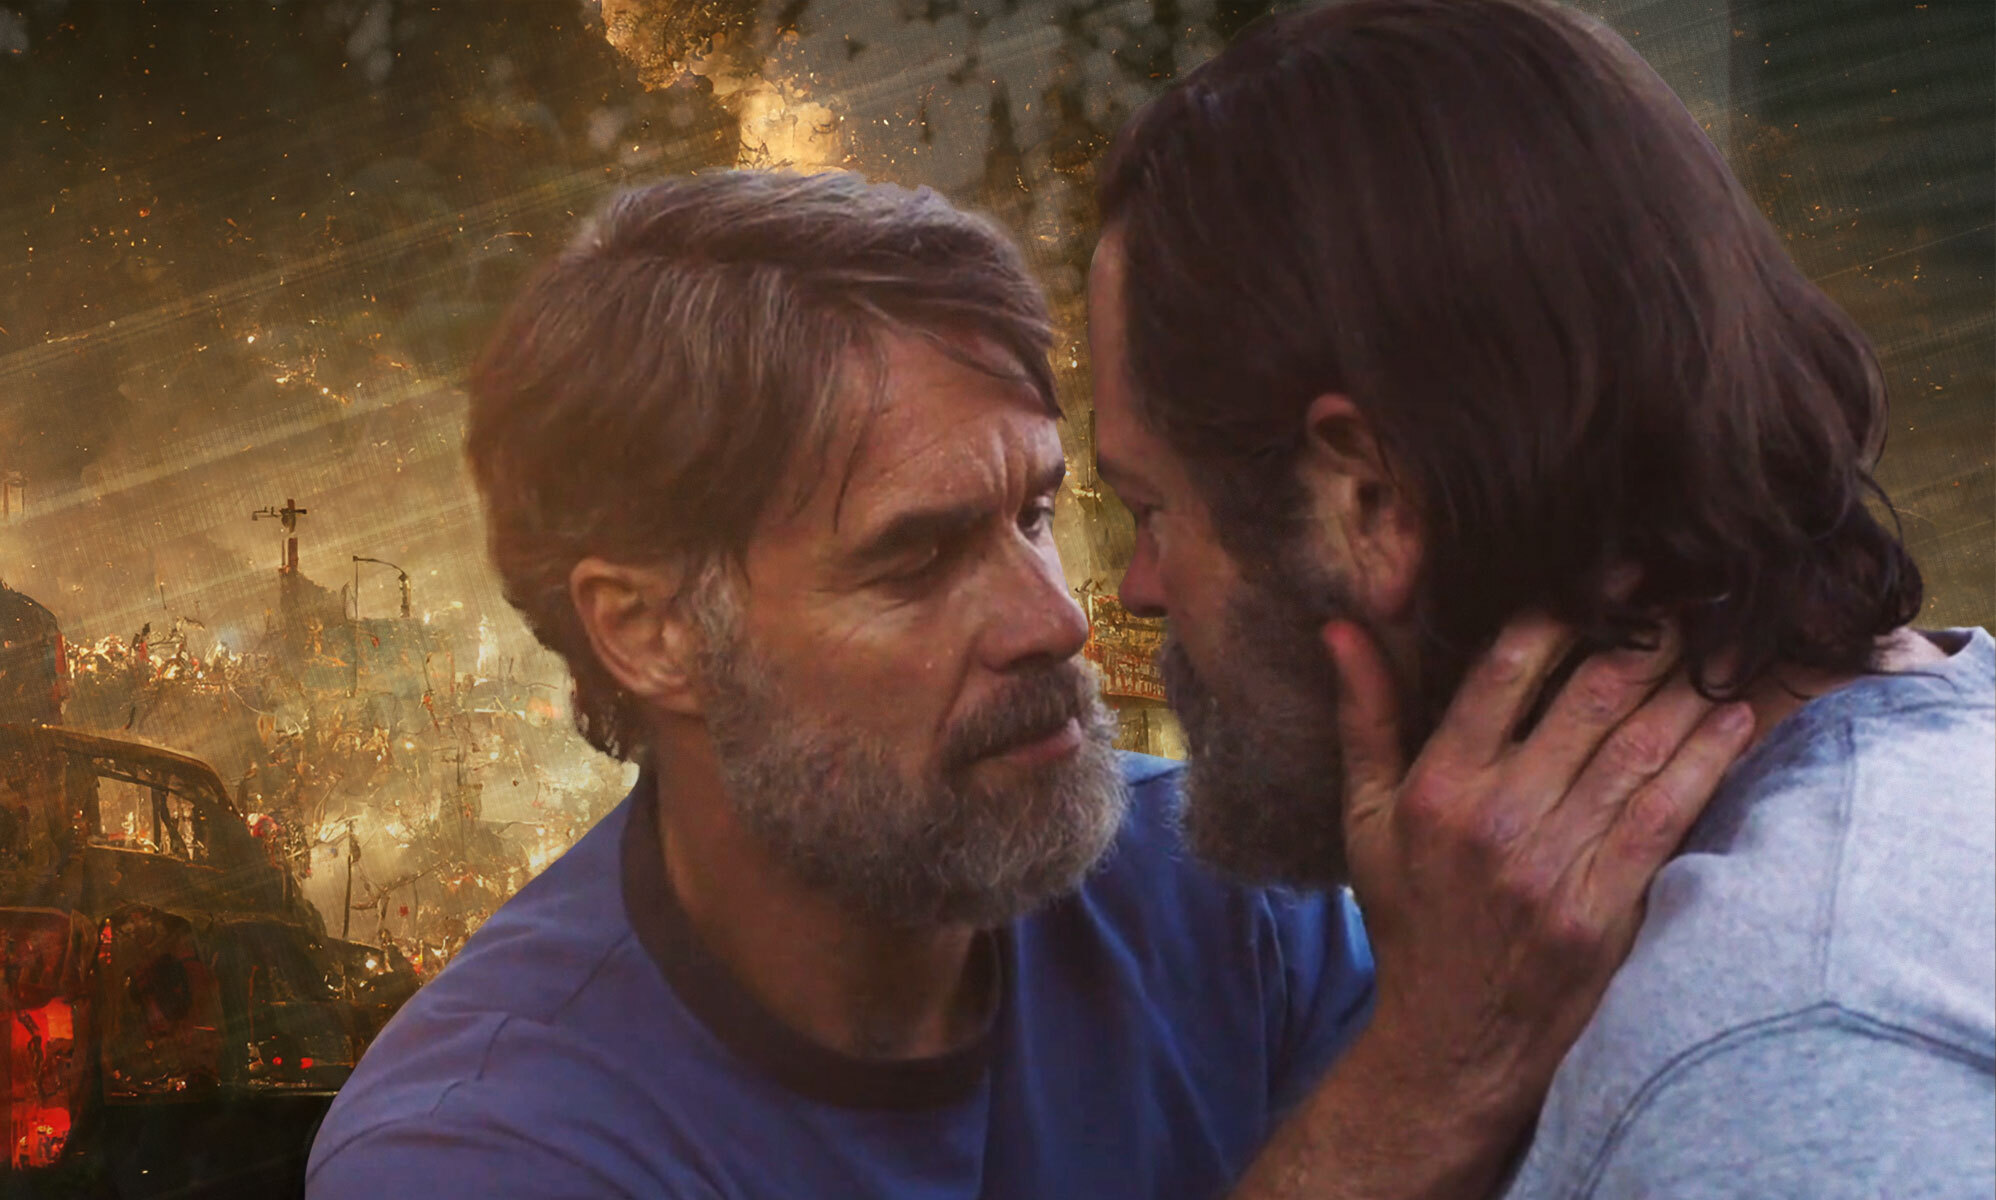 The Last of Us' Episode 3 Recap: Bill and Frank Get the Love Story